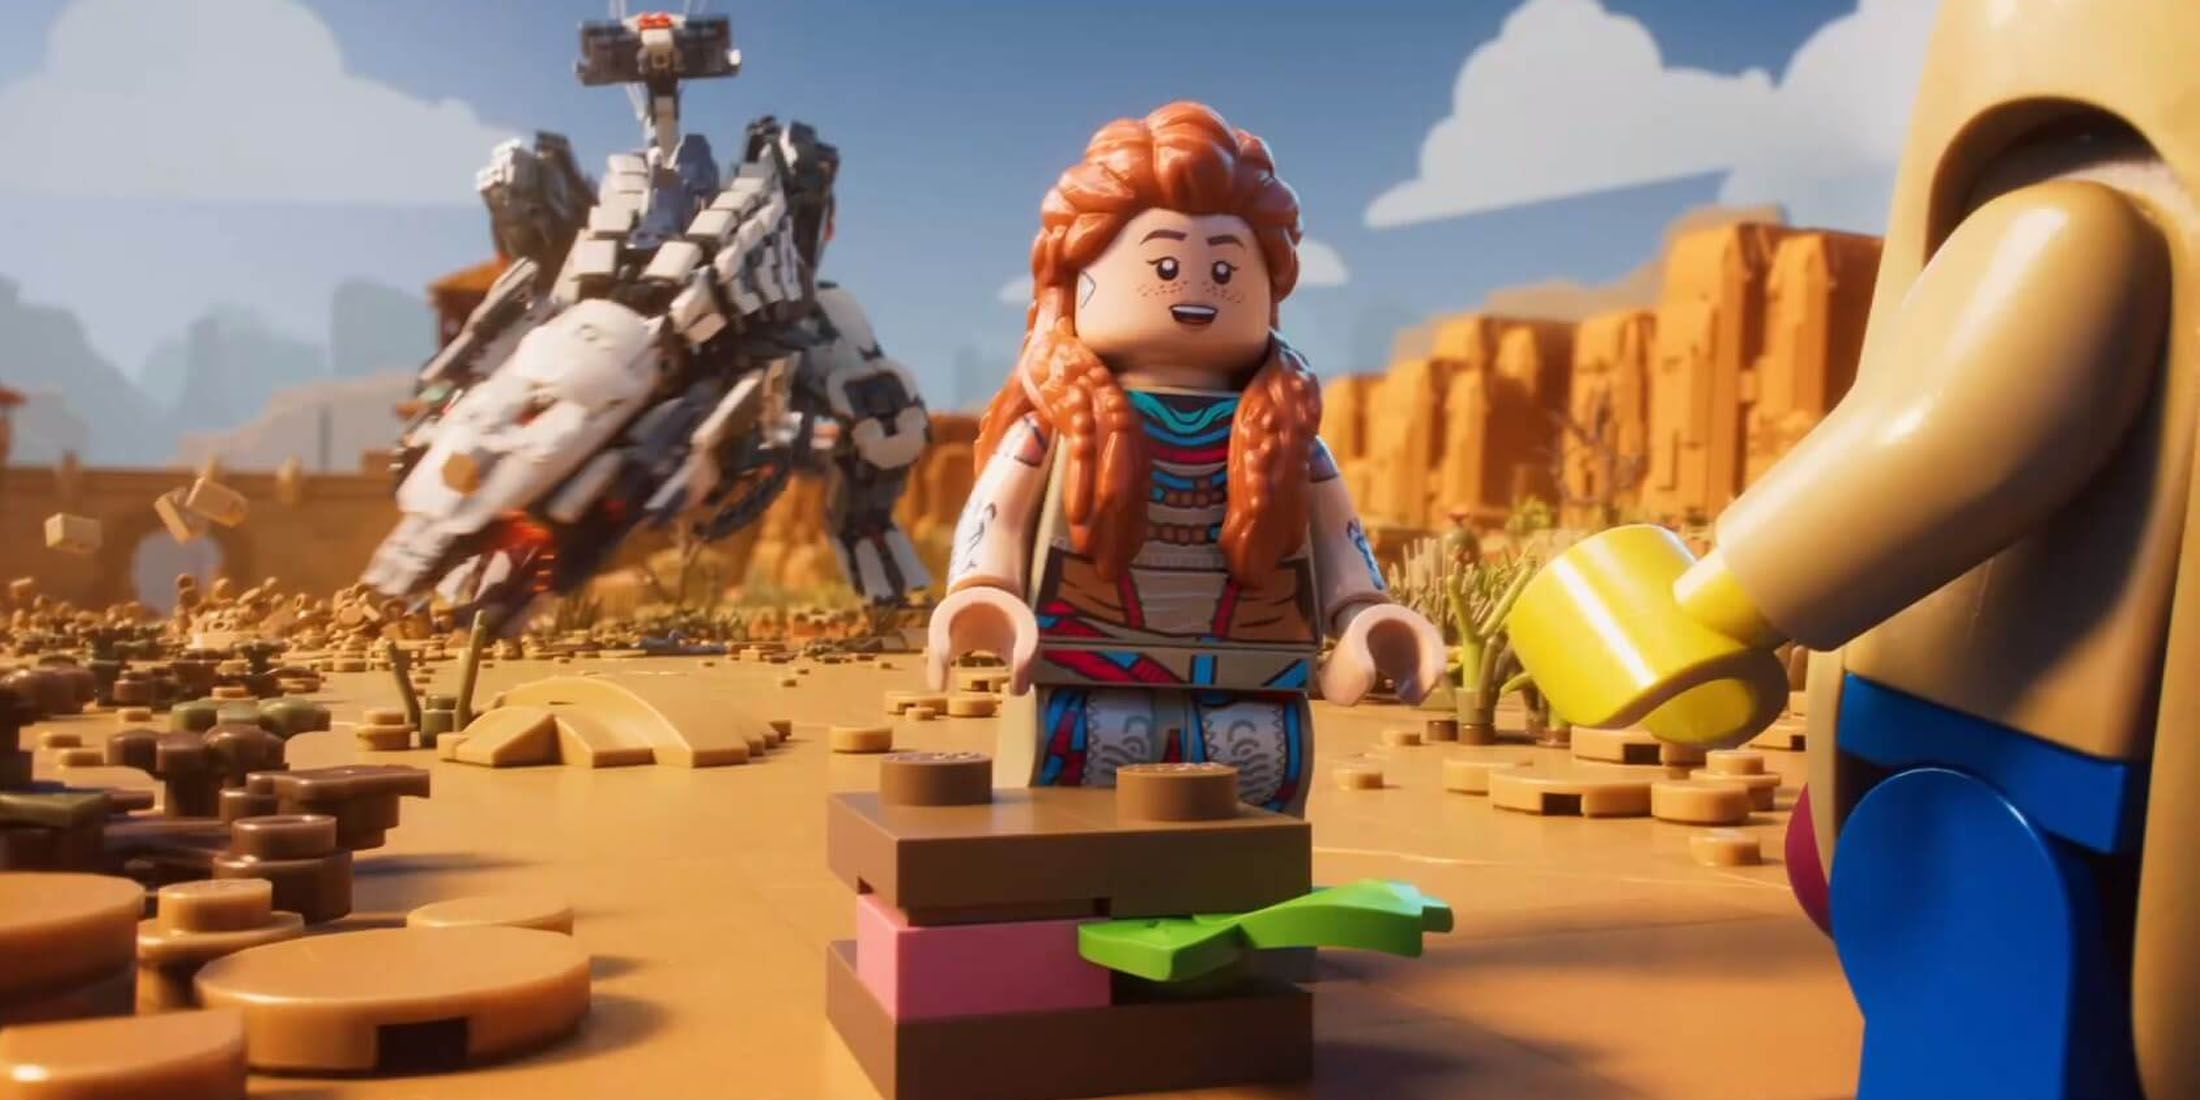 A screenshot of Aloy talking to a LEGO Minifigure in a Hot Dog costume in LEGO Horizon Adventures.